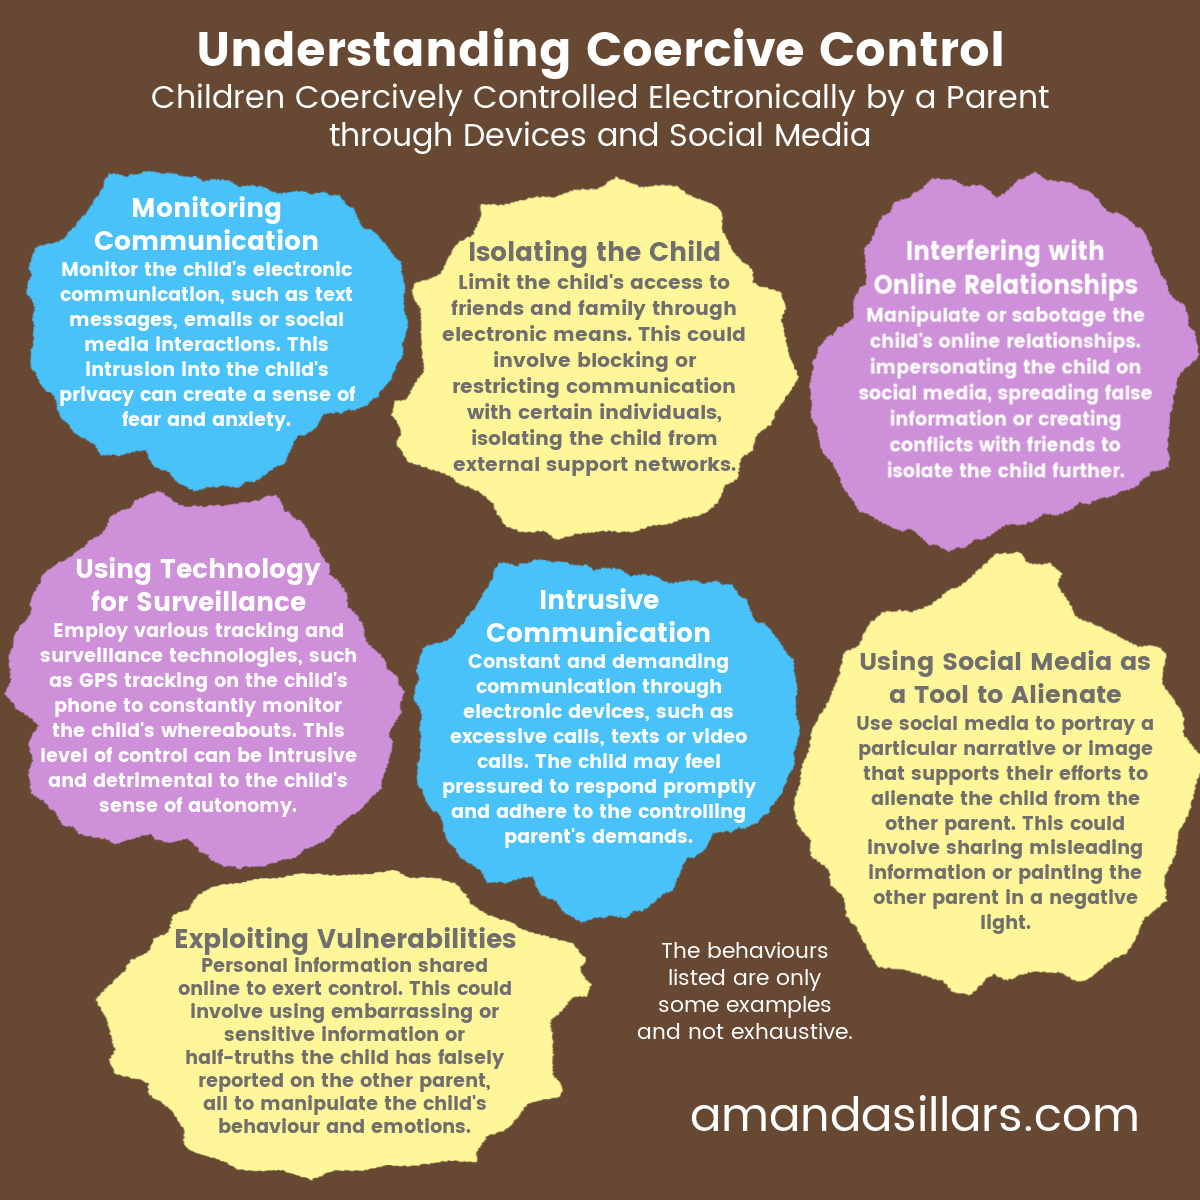 These behaviours can have serious consequences on the child's well-being, their relationship with their other parent and may contribute to long-term emotional and psychological issues. 
#CoerciveControl #ParentalAlienation #DigitalManipulation #ChildWellbeing #OnlineSafety